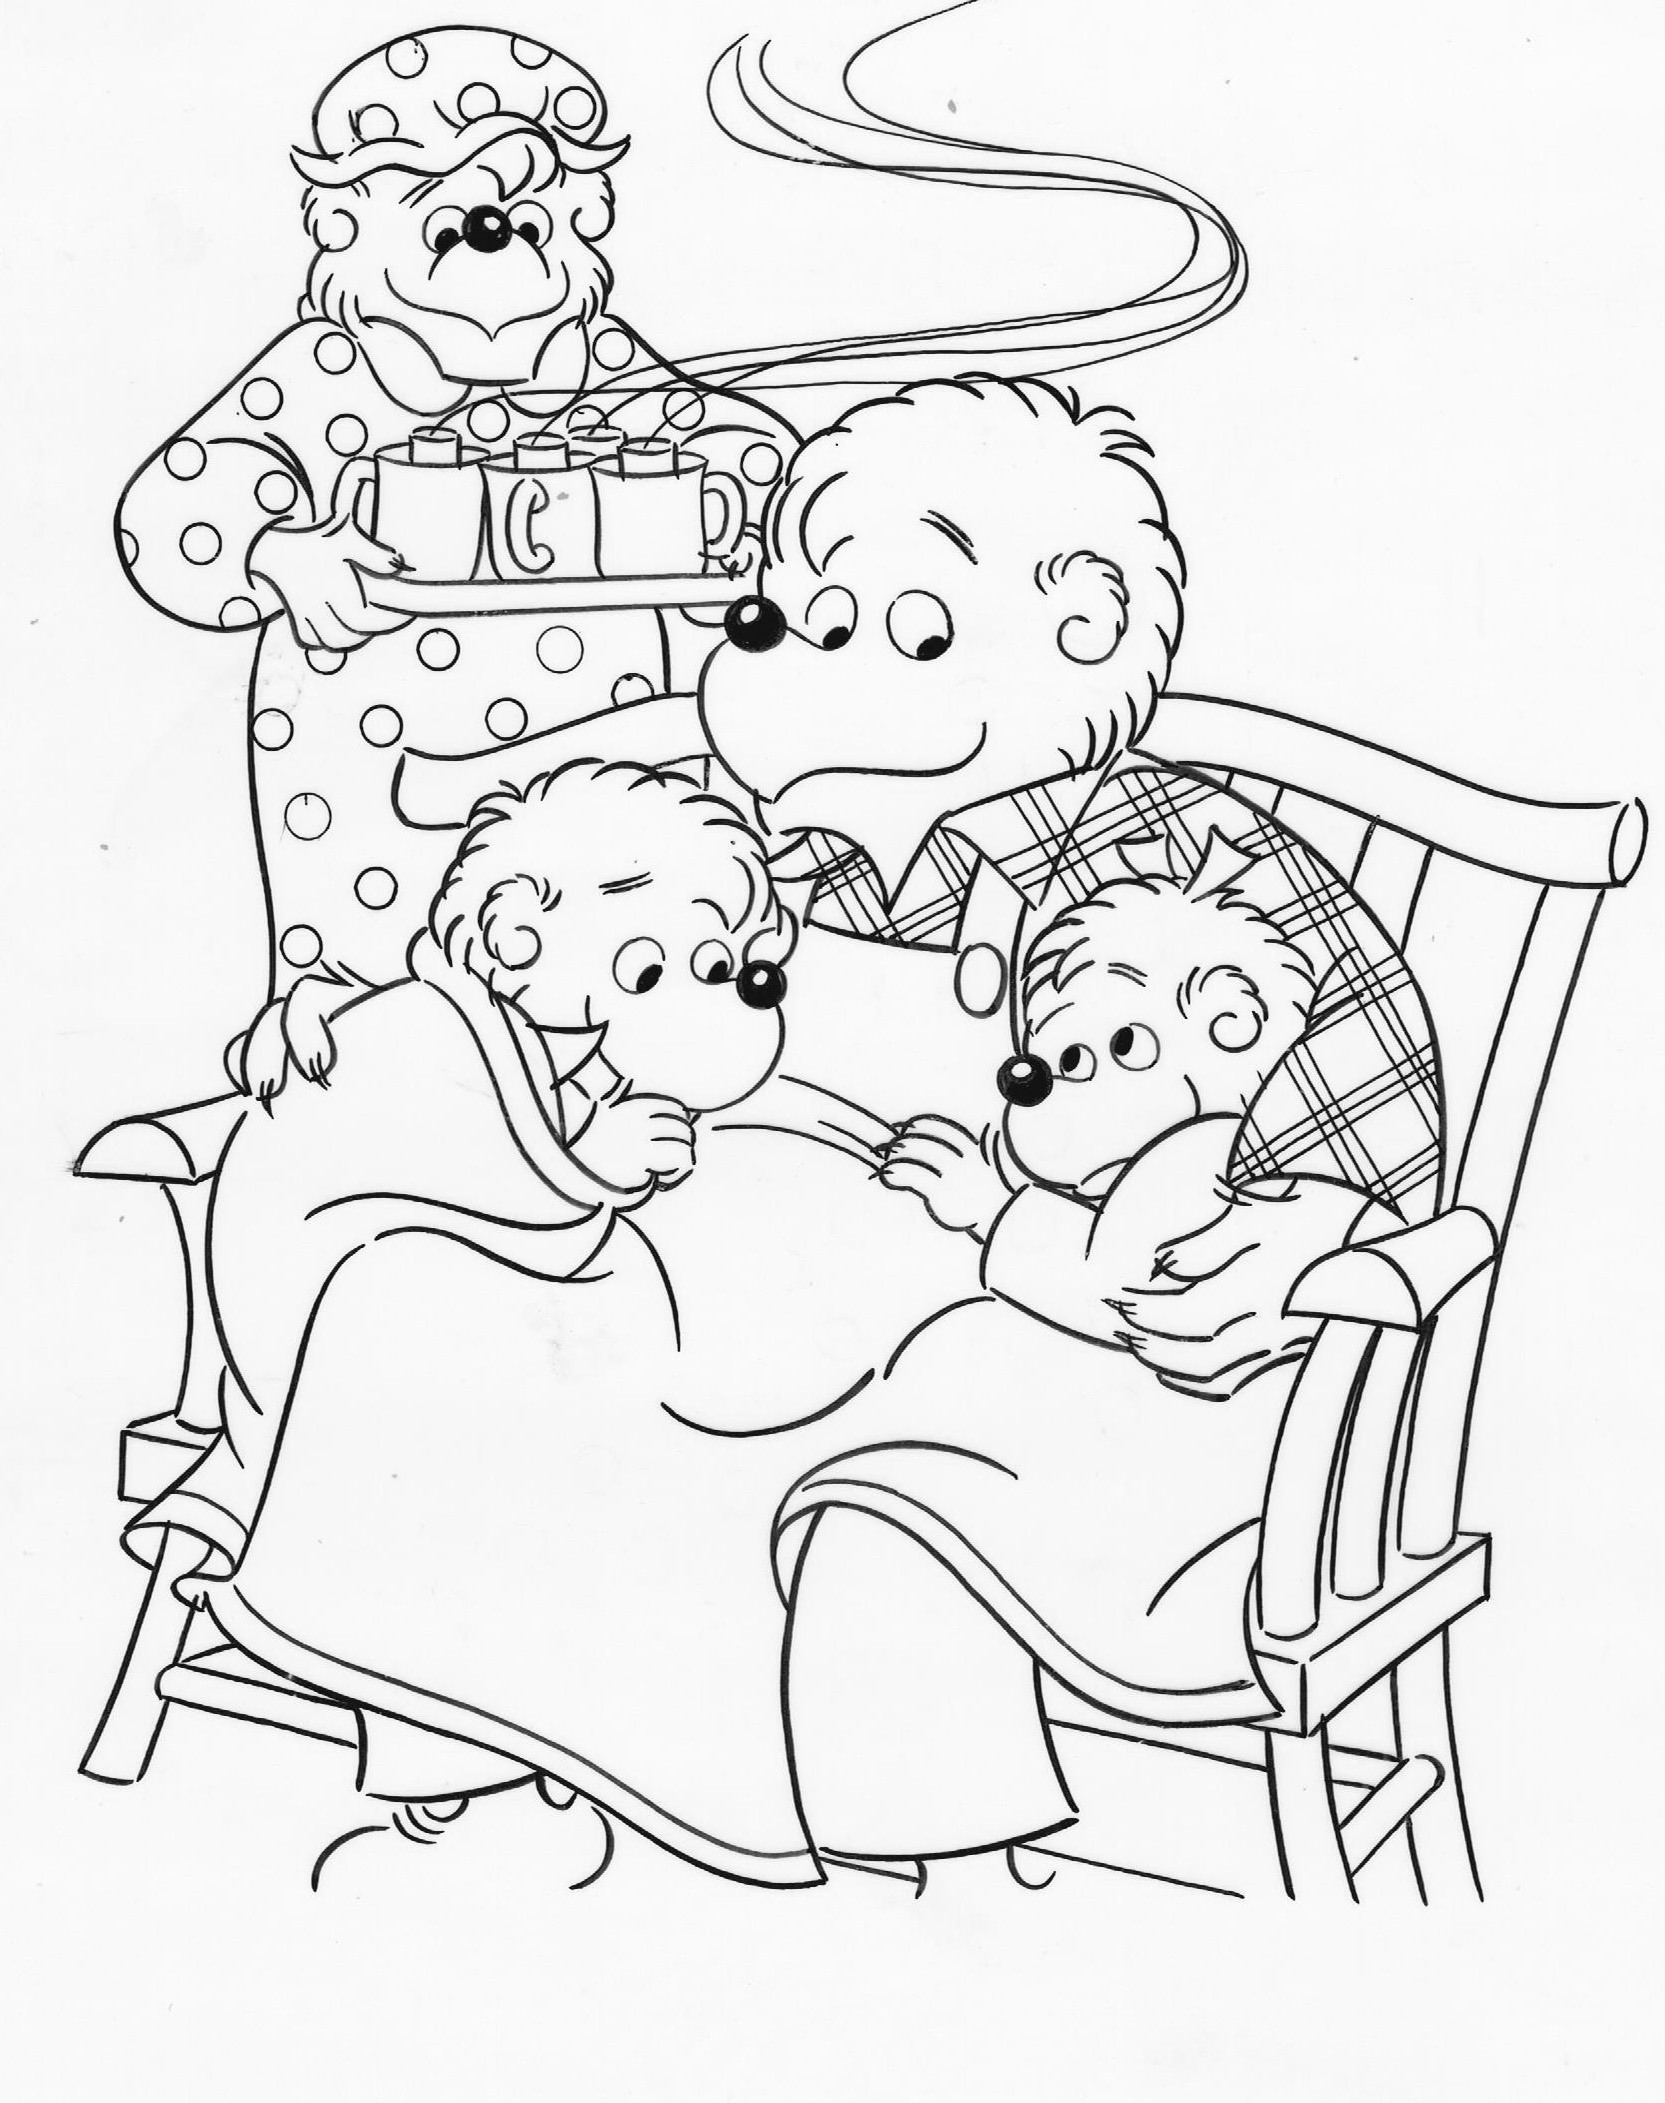 Berenstain Bears Coloring Pages Berenstain Bears Coloring Pages At Getdrawings Free For